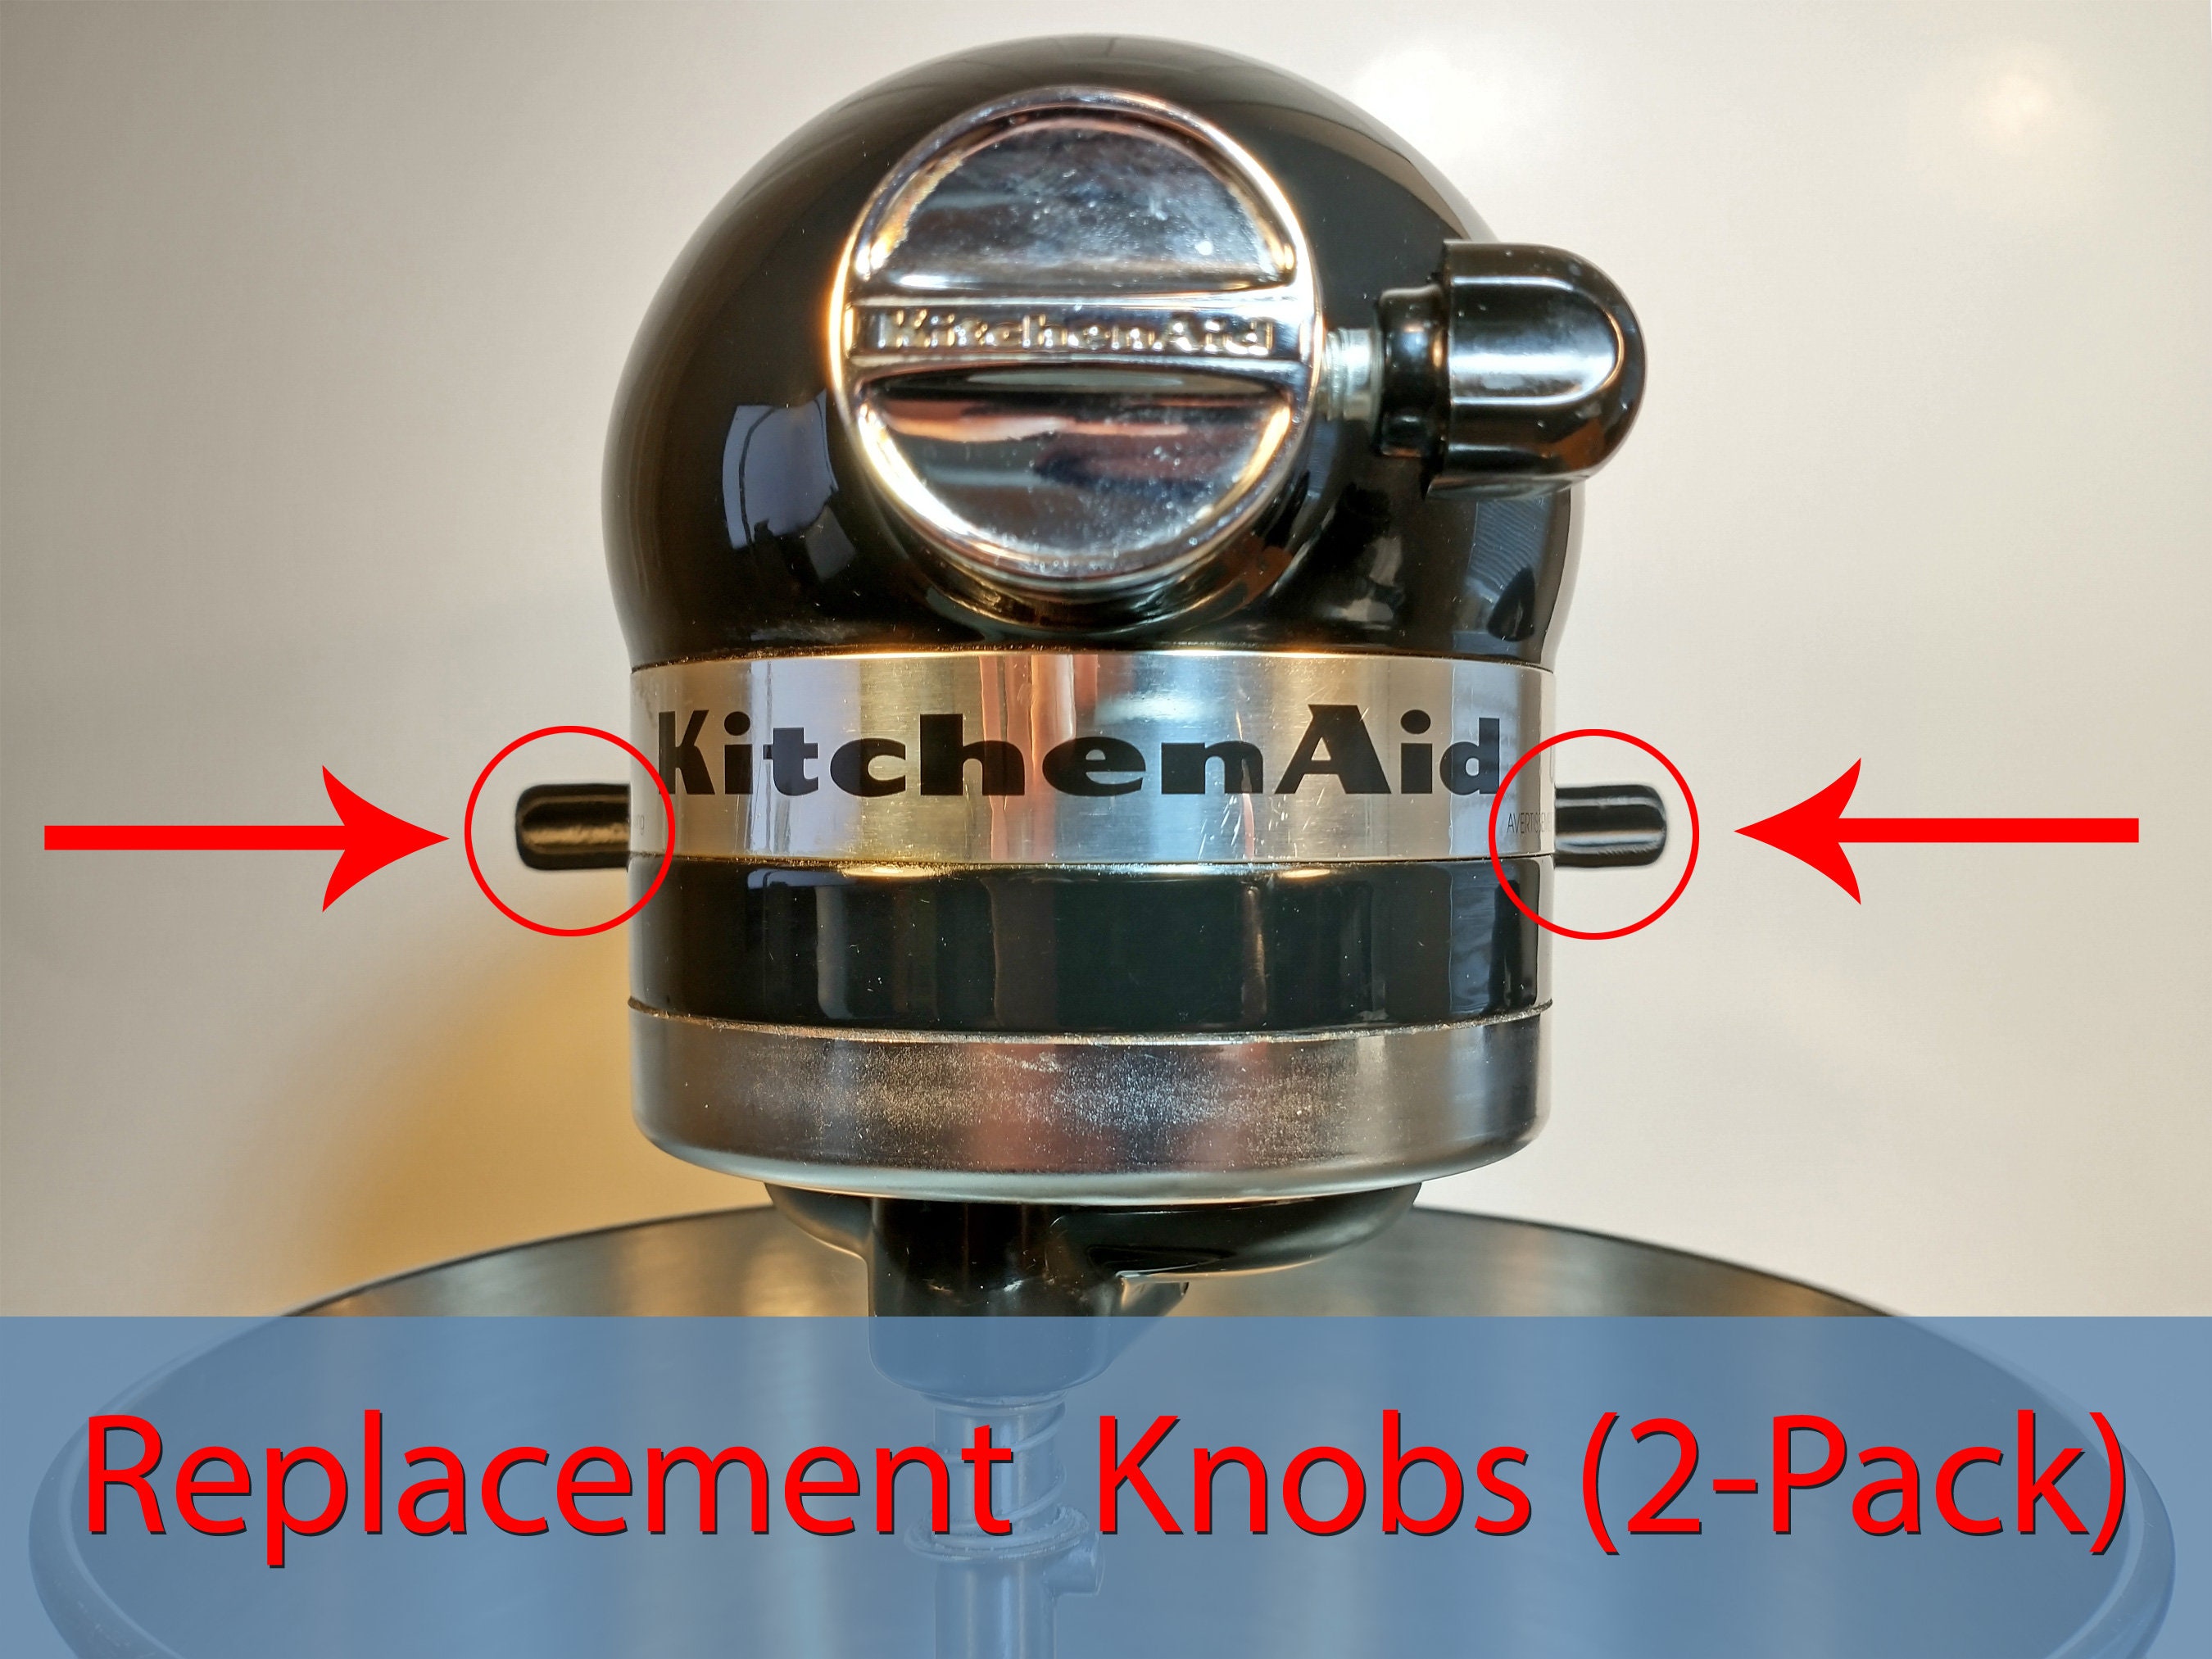 White Replacement Lock Knobs for Kitchen Aid Stand Mixer 